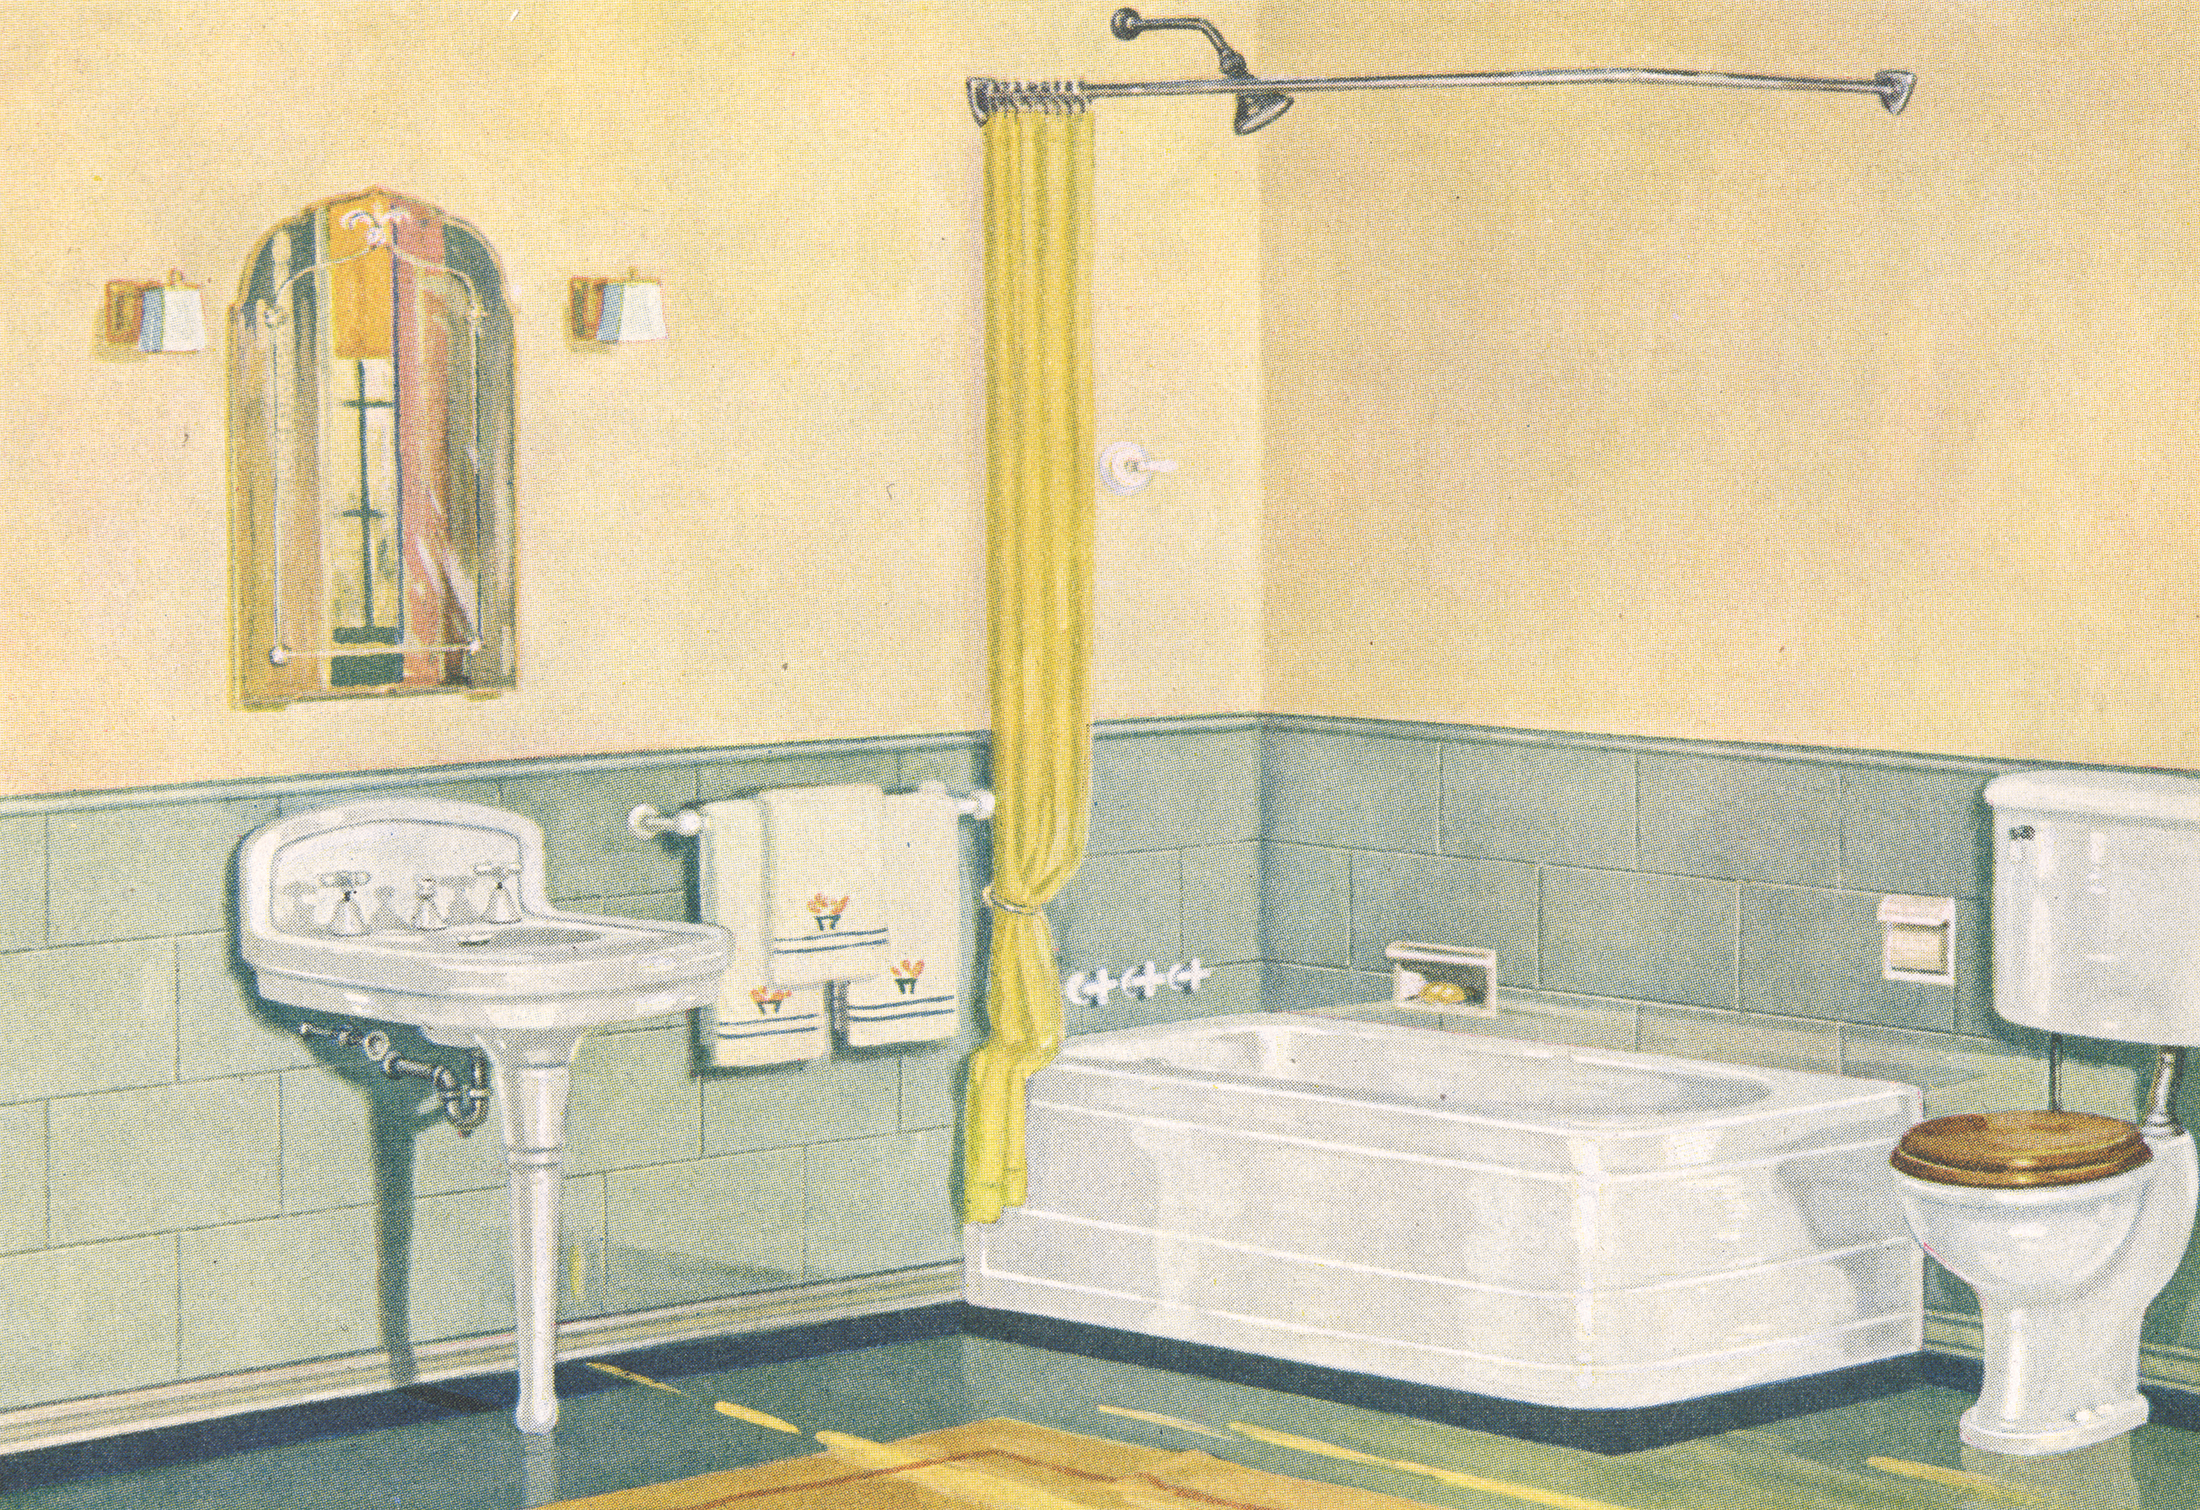 vintage illustration of a bathroom with white fixtures and green tile walls